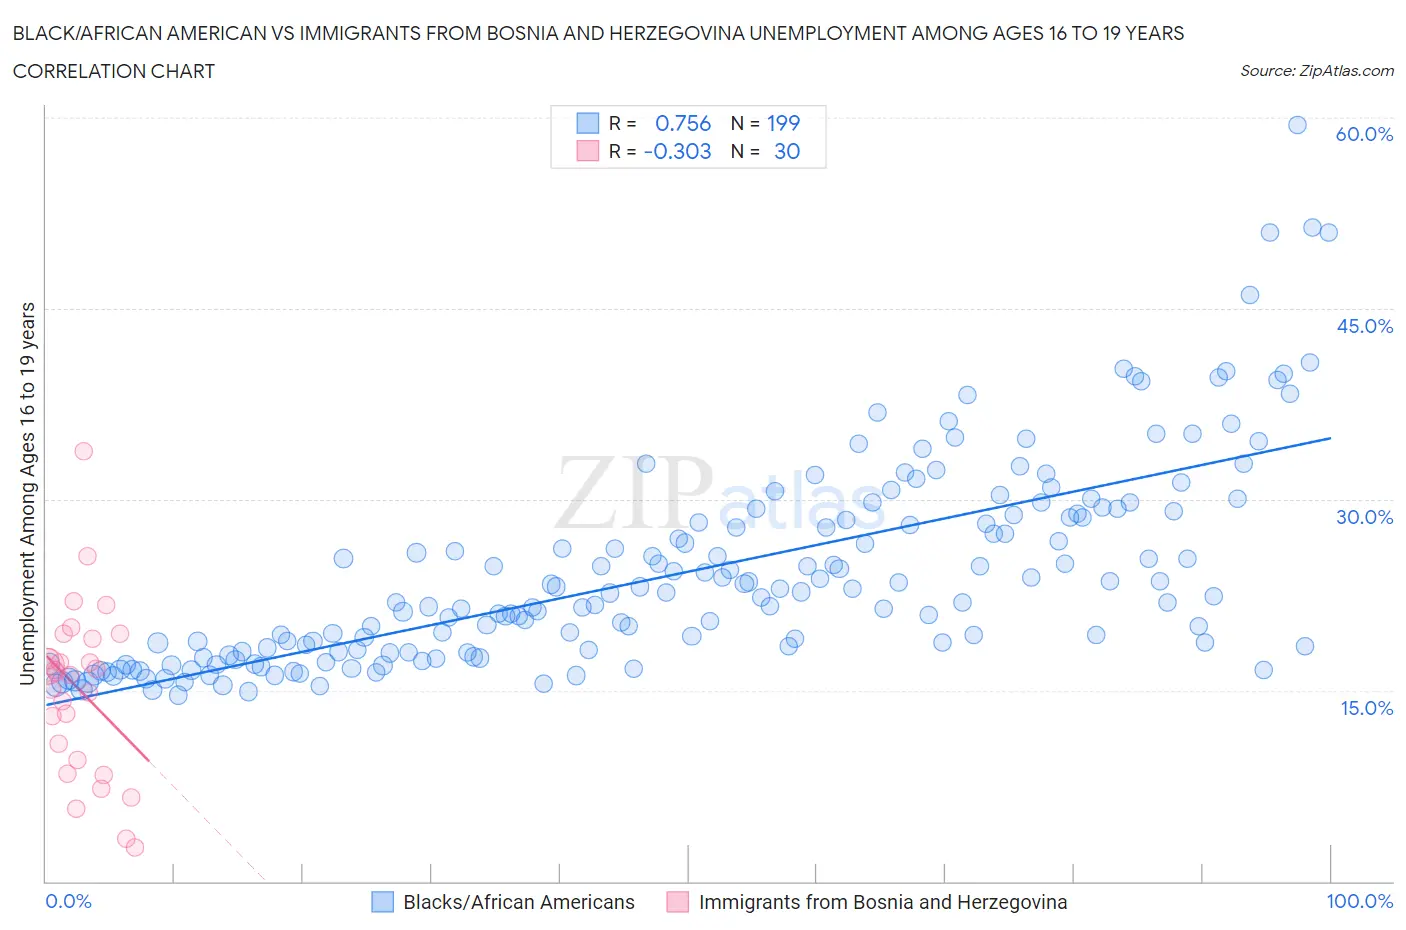 Black/African American vs Immigrants from Bosnia and Herzegovina Unemployment Among Ages 16 to 19 years